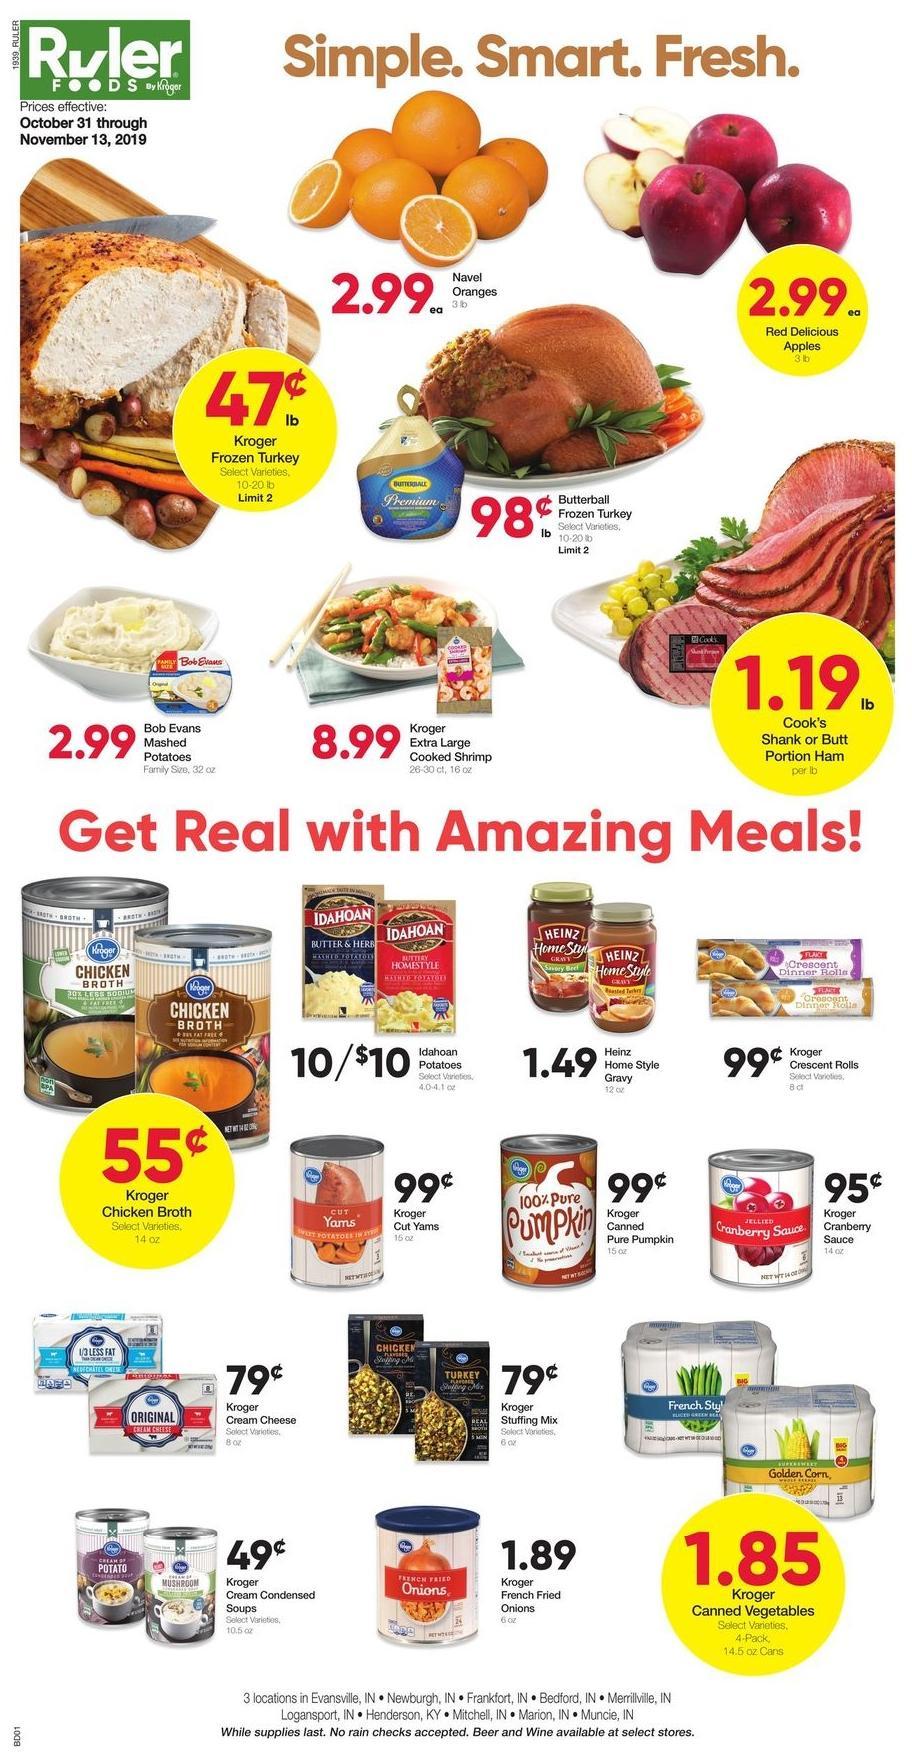 Ruler Foods Weekly Ad from October 31